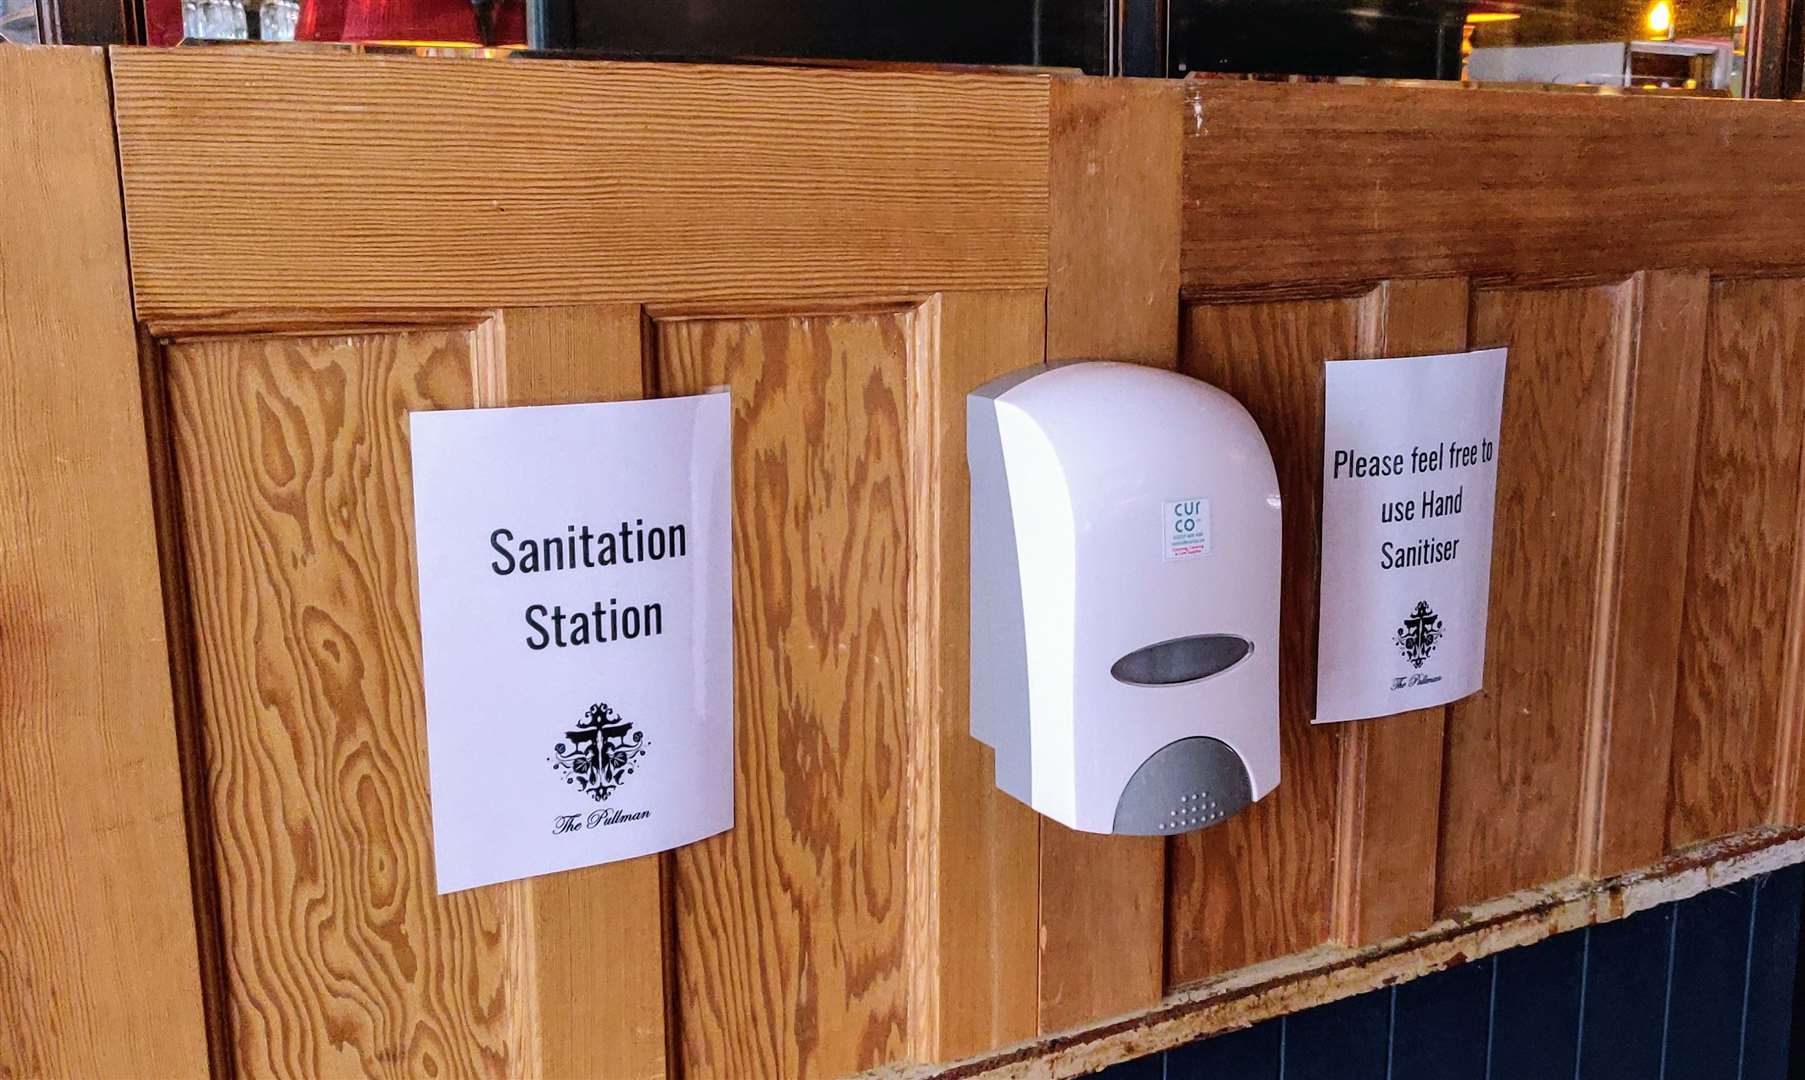 The Pullman has numerous hand sanitiser stations installed in the pub to help staff and customers keep clean